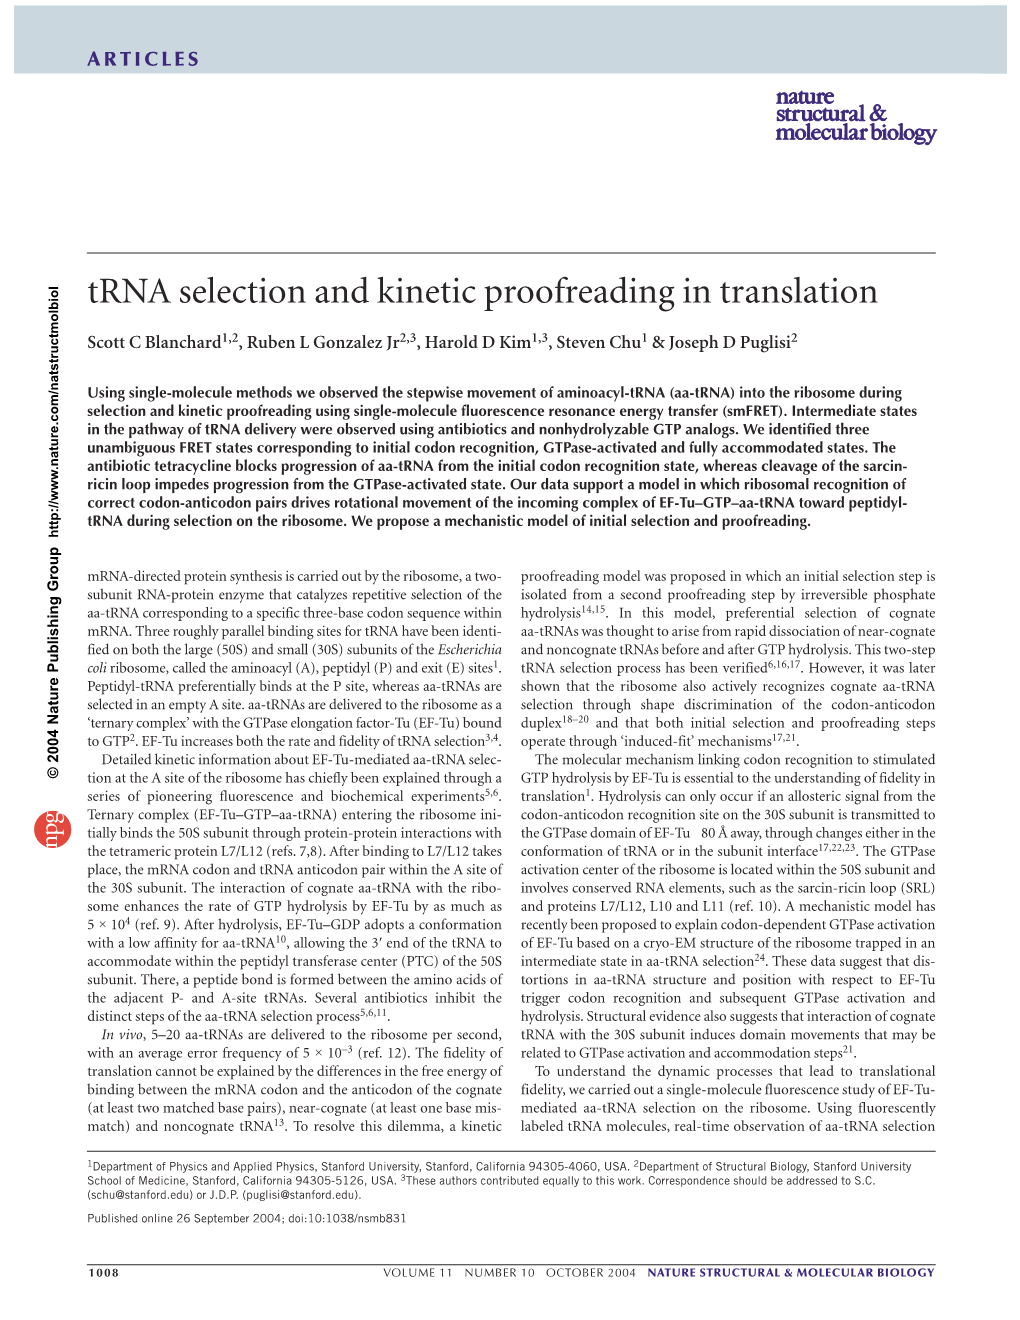 Trna Selection and Kinetic Proofreading in Translation